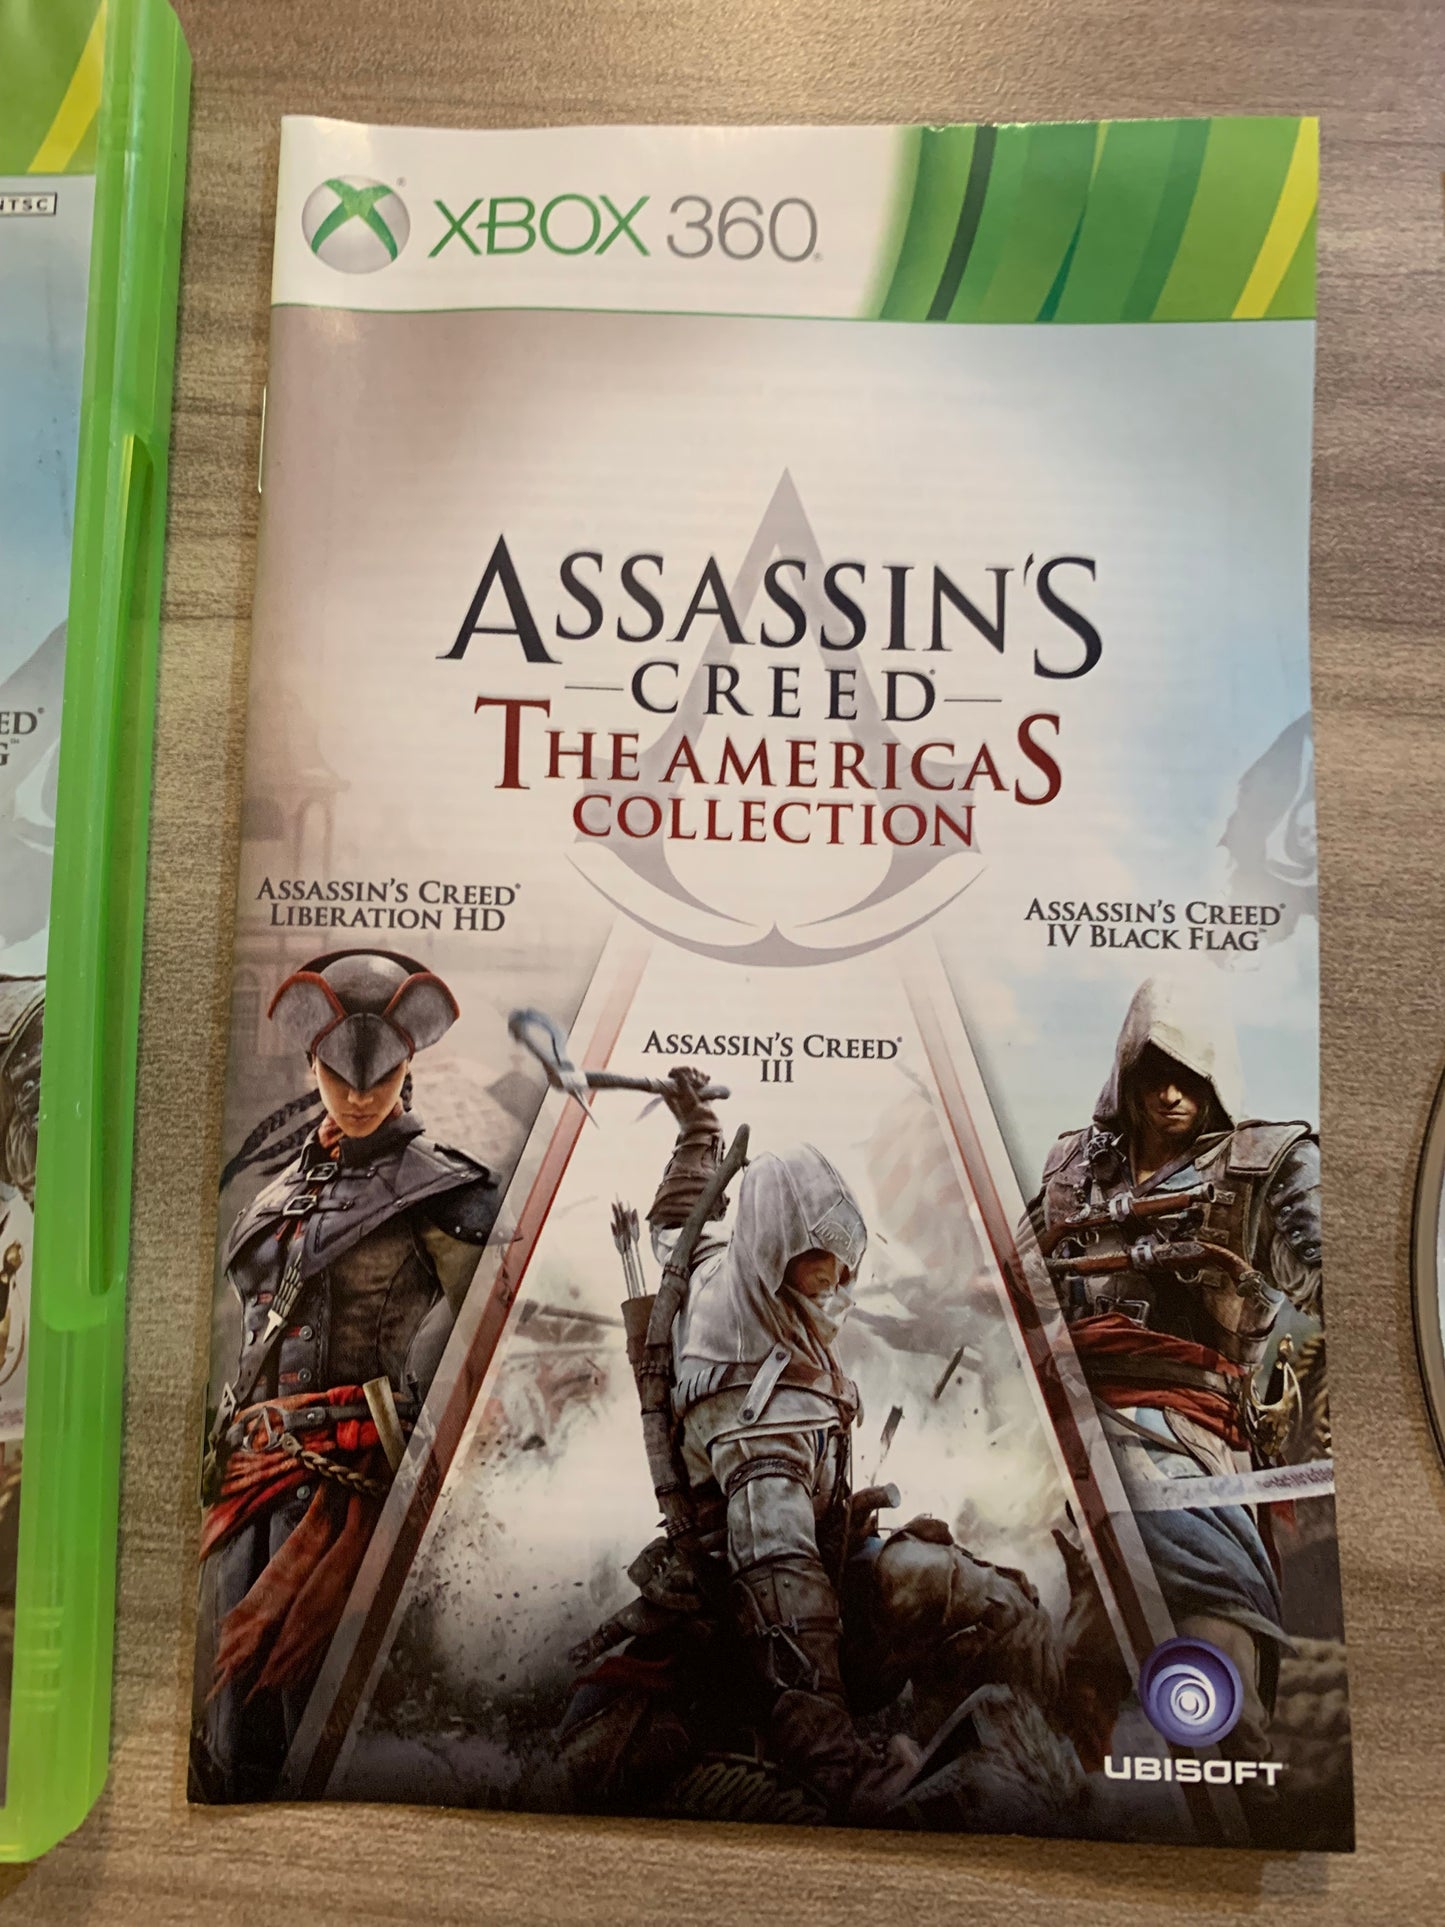 MiCROSOFT XBOX 360 | ASSASSiNS CREED THE AMERiCAS COLLECTiON